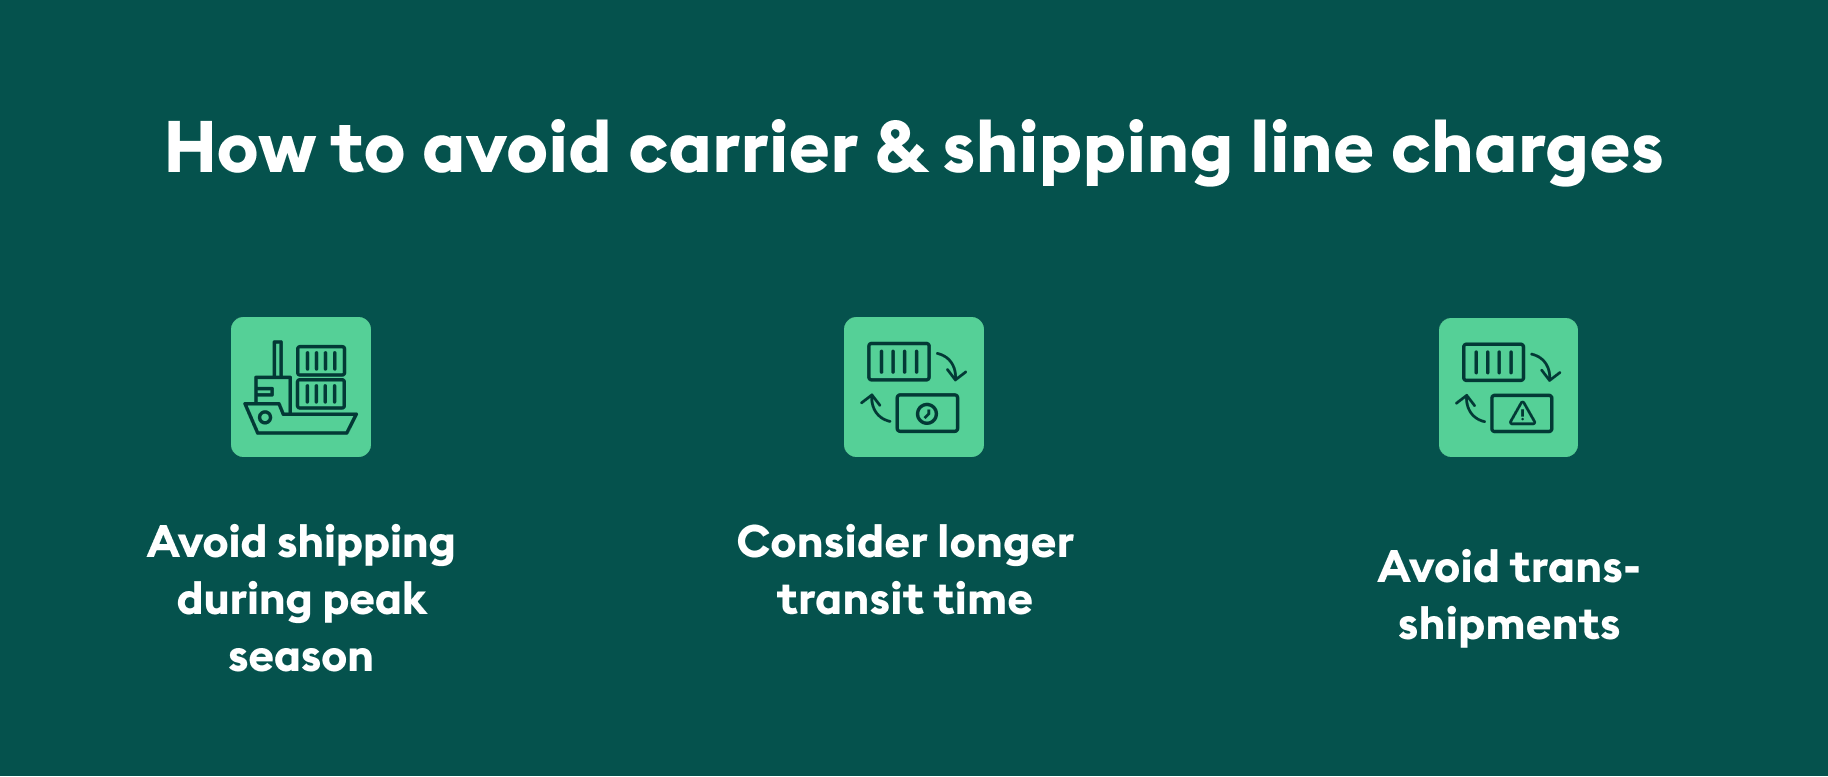 How to avoid carrier and liner charges